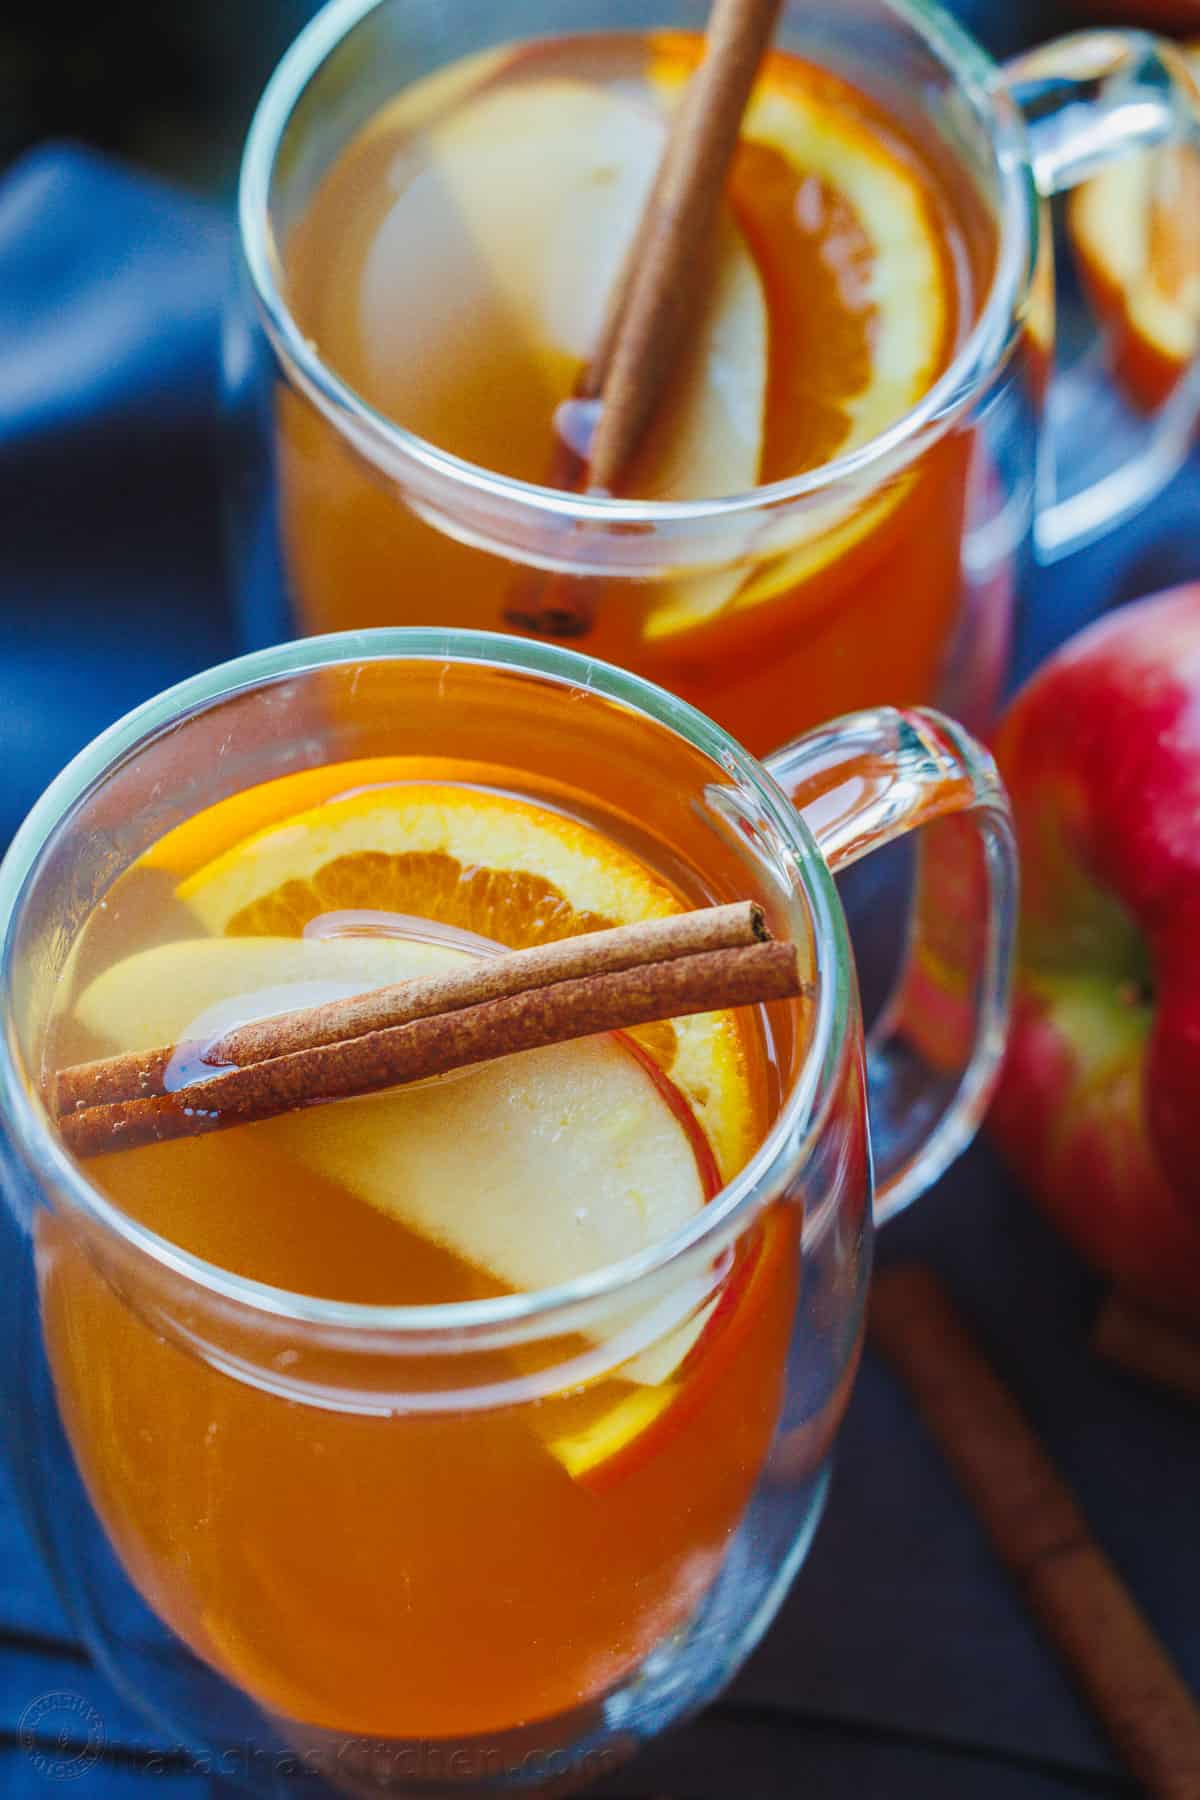 Apple cider garnished with apple and orange slices and a cinnamon stick. Served in a glass mug.